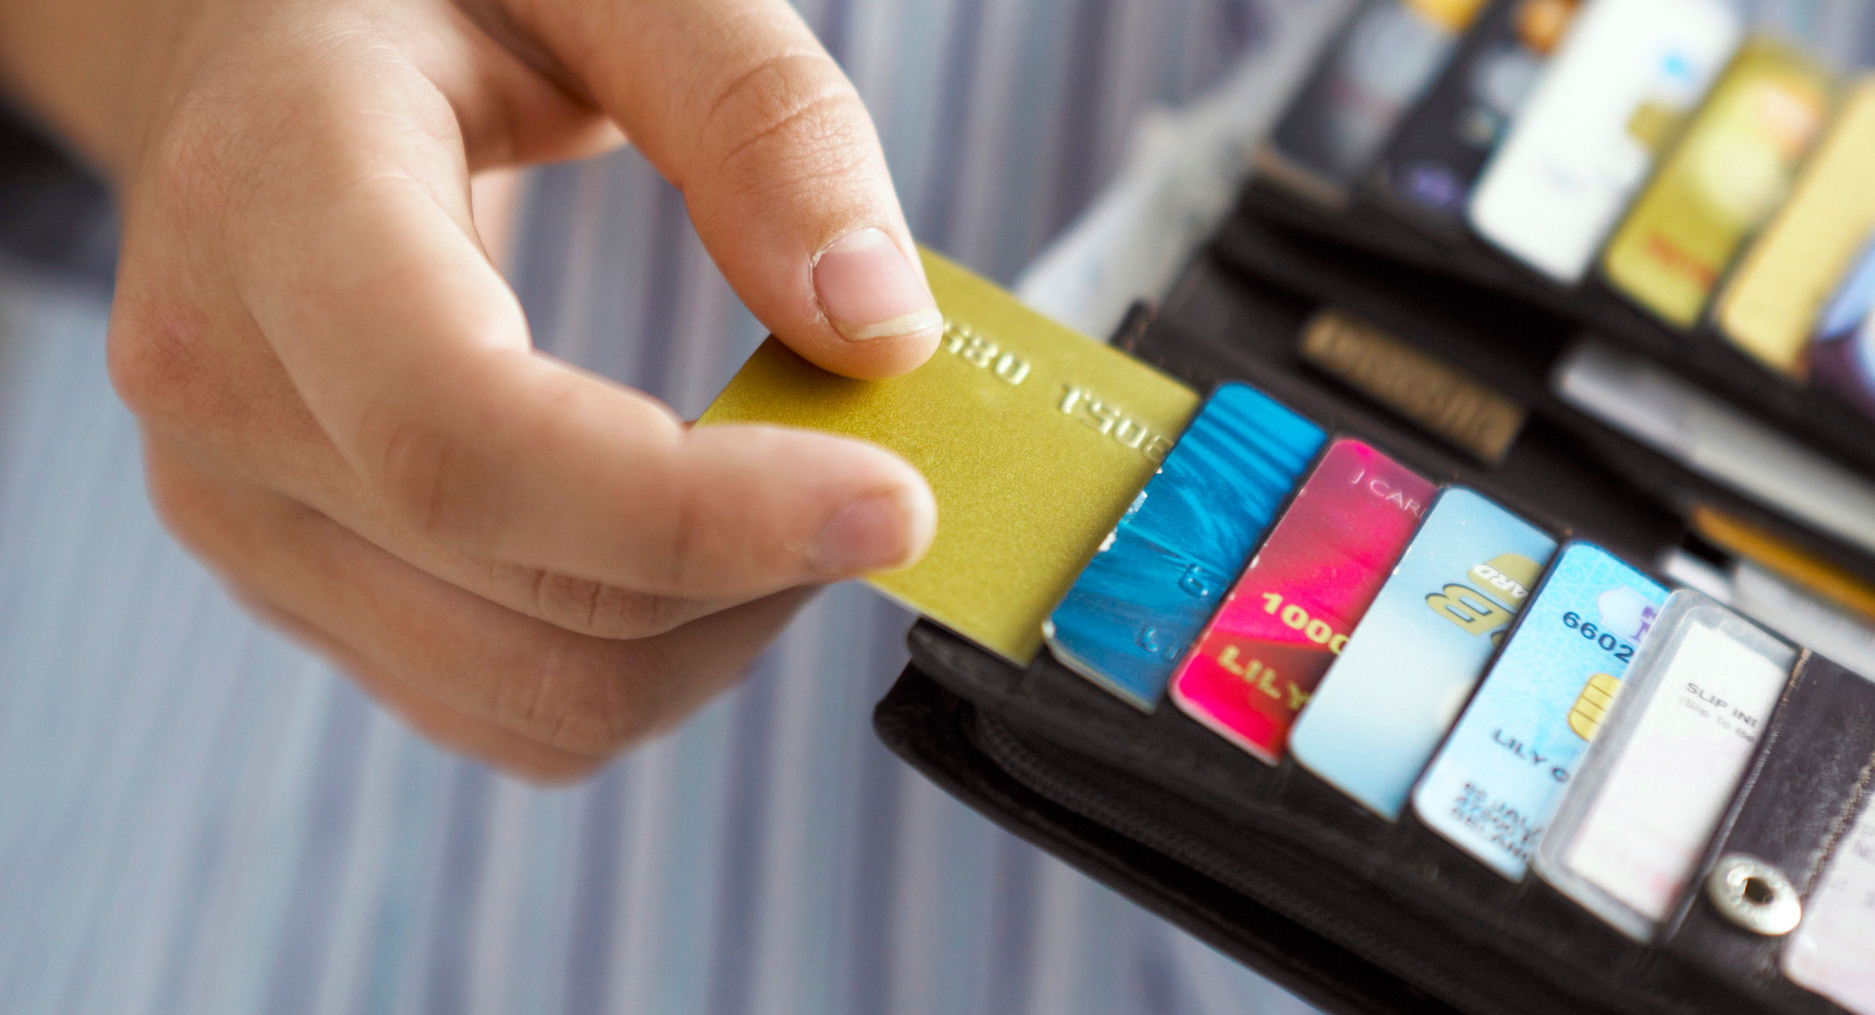 Avoid Falling Deeper Into The Credit Card Debt Trap – Some Debt Solutions That May Help